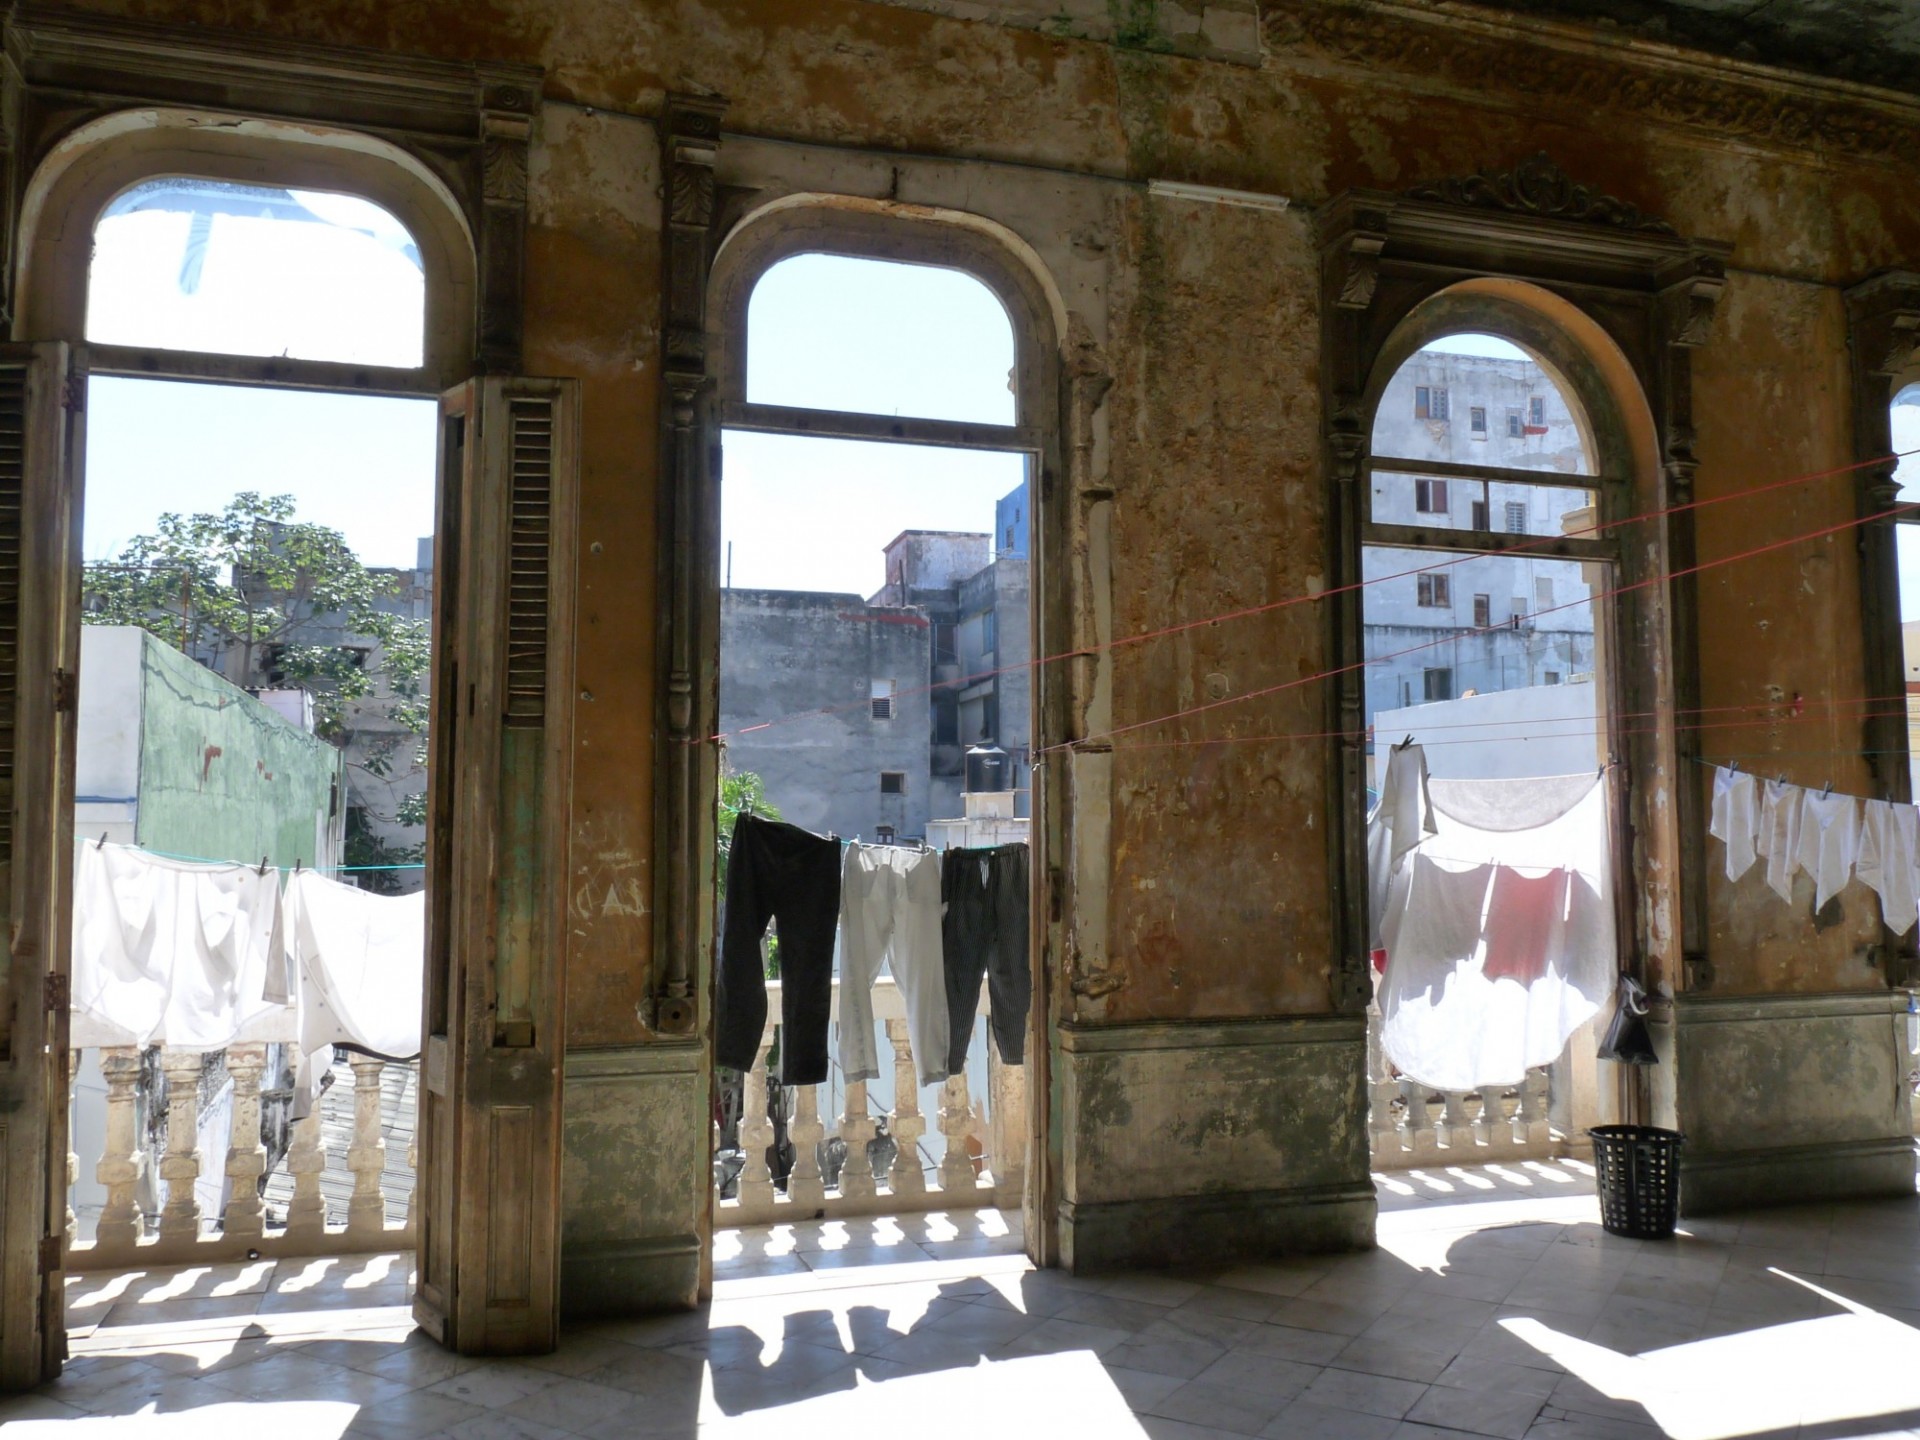 Deteriorating interior with large open windows looking out on a terrace full of clothing hung out to dry.